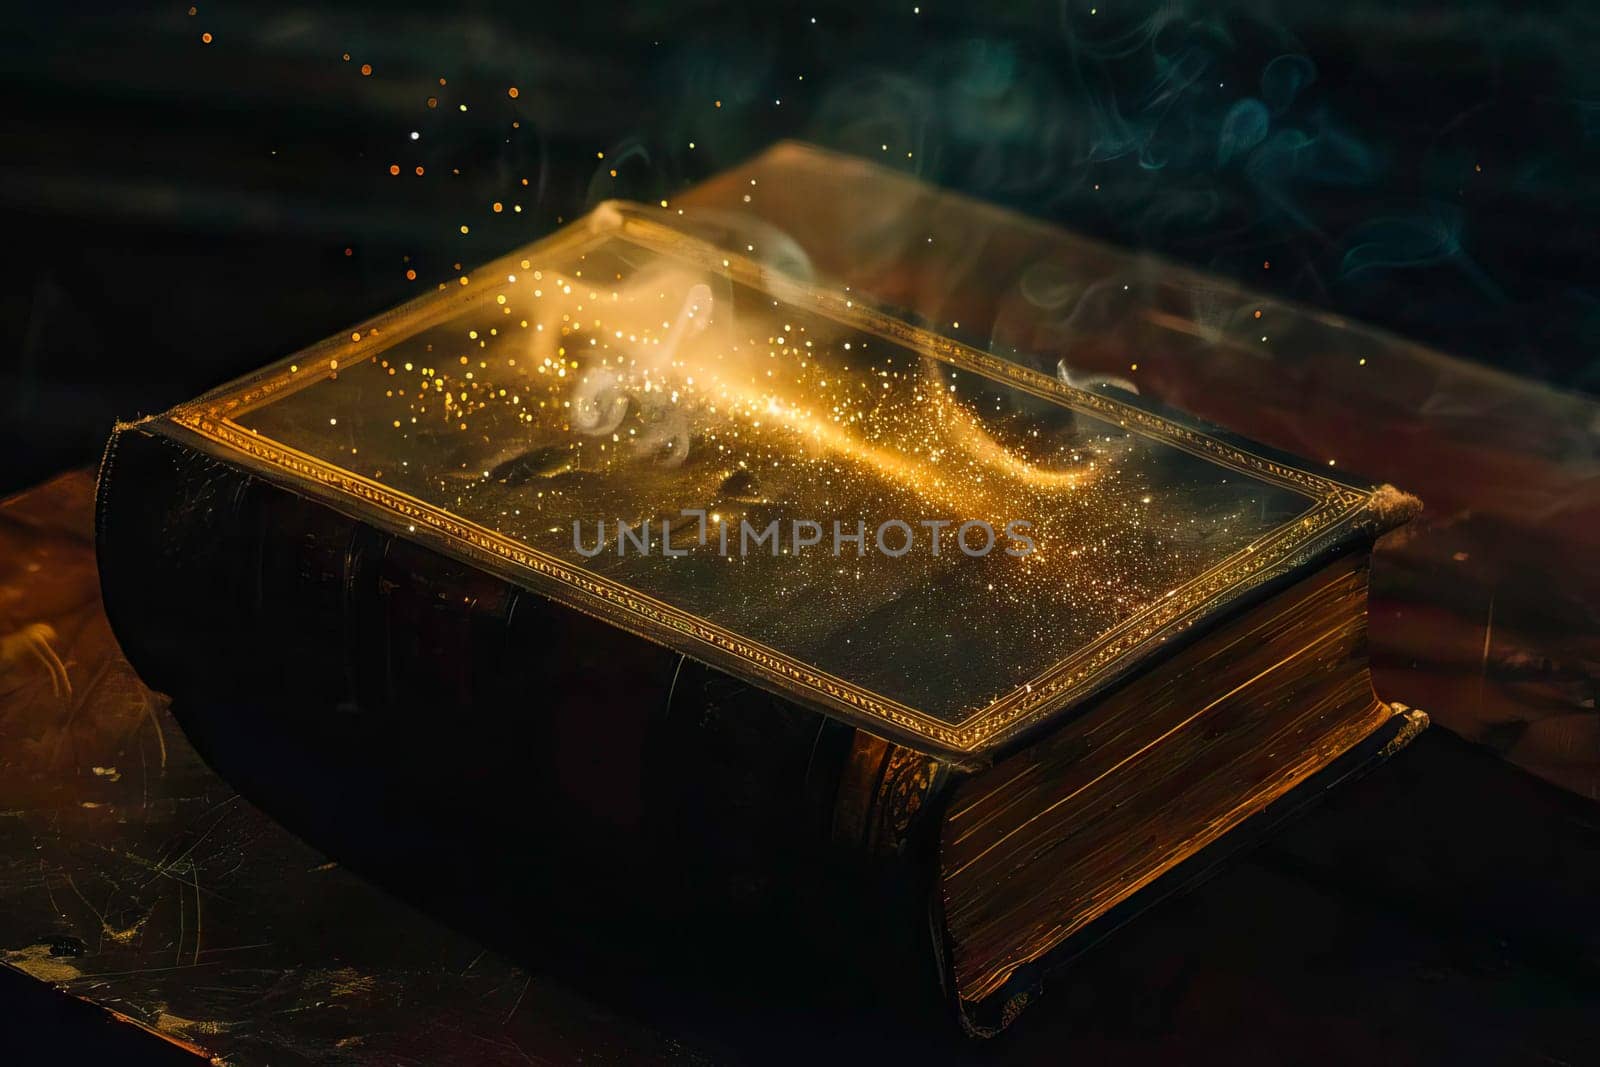 A book with a golden dust shimmering inside, resembling a sacred glow.